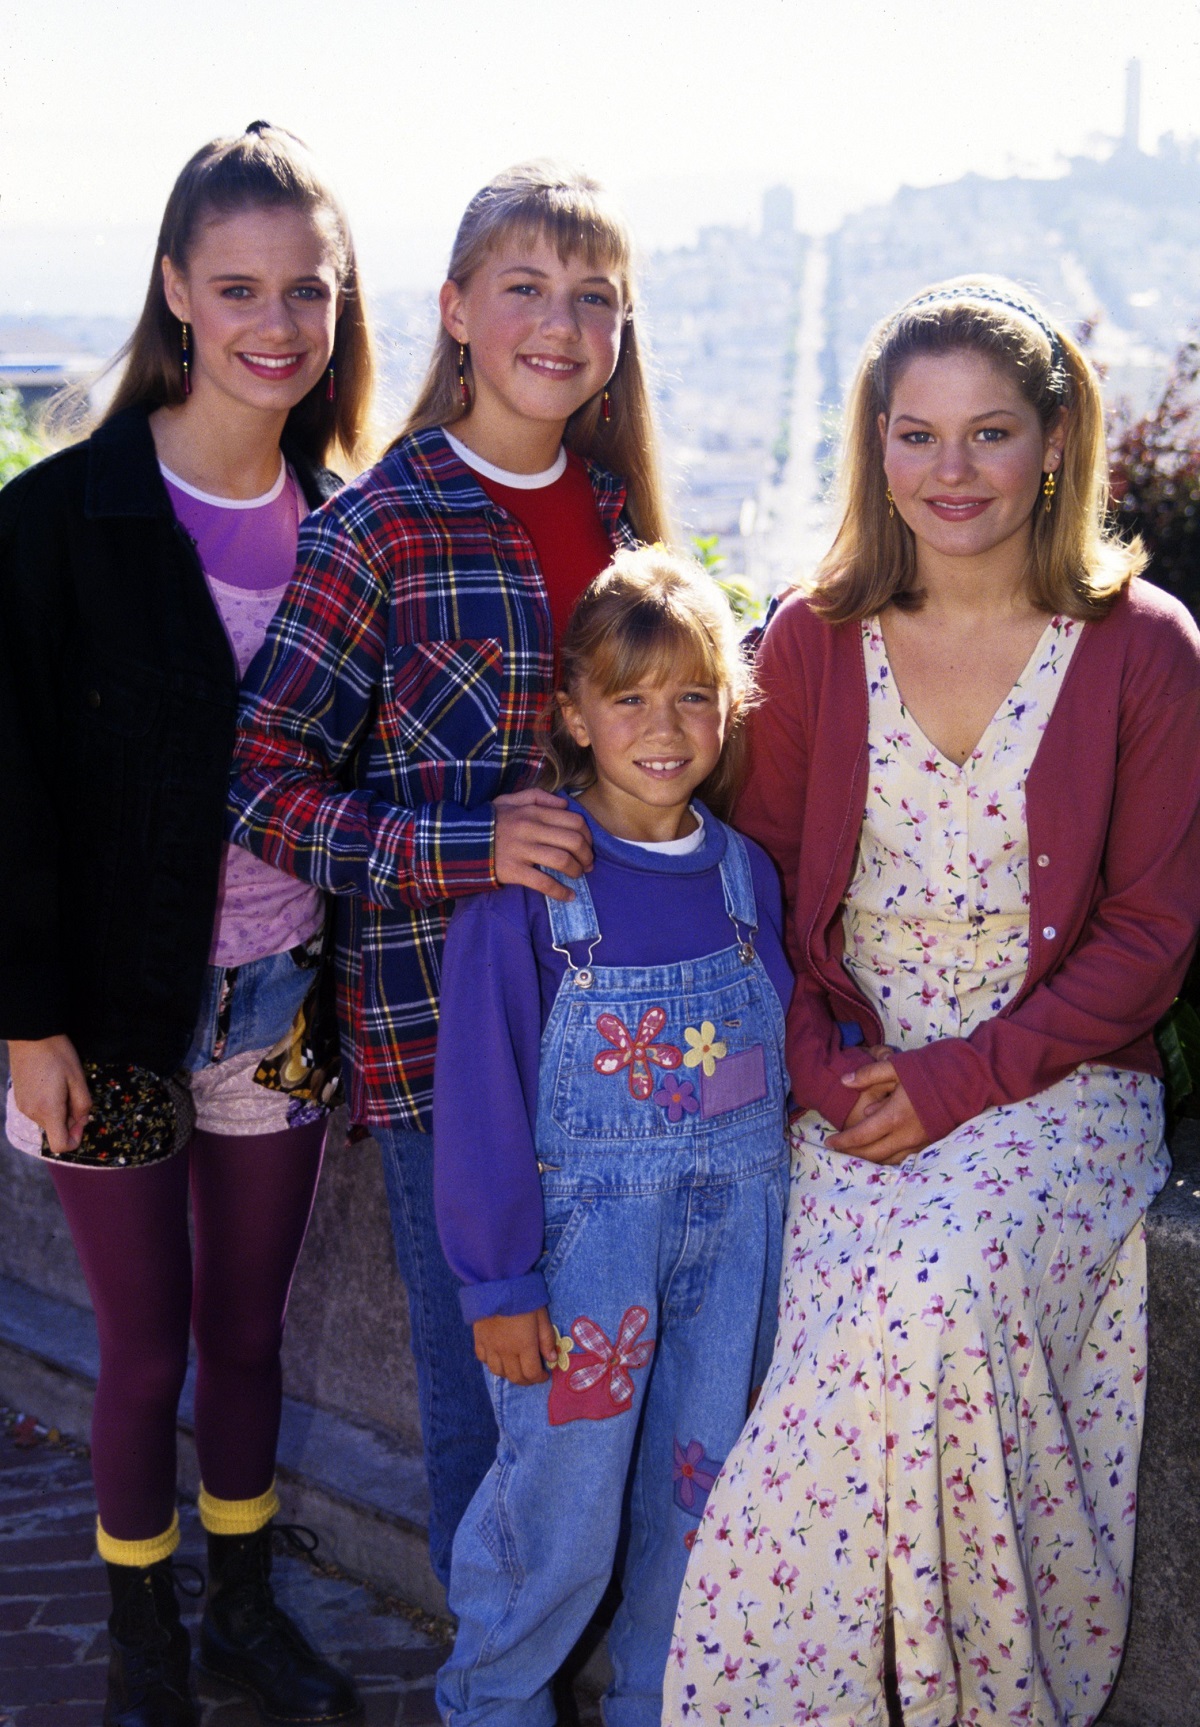 Andrea Barber, Jodie Sweetin, Mary-Kate or Ashley Olsen, and Candace Cameron